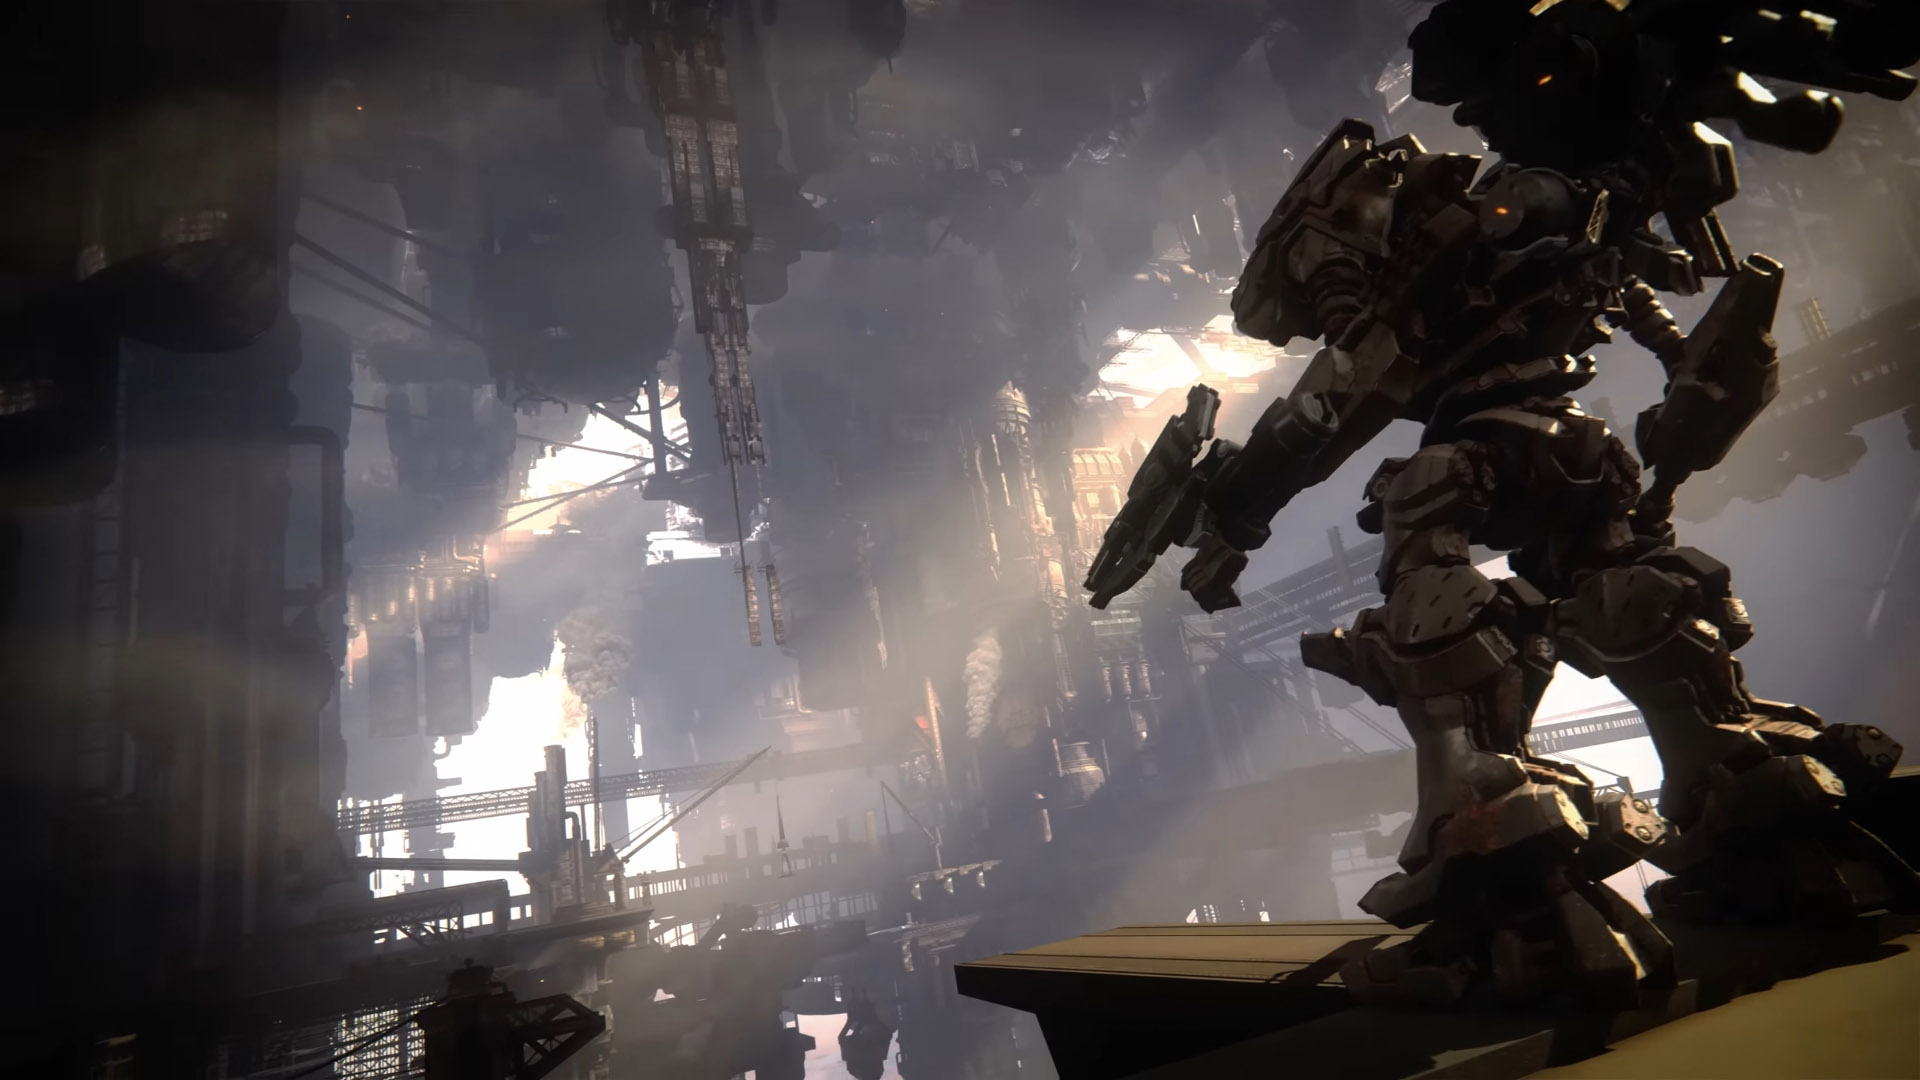 Armored Core 6 features intricate, complex worlds of Rubicon